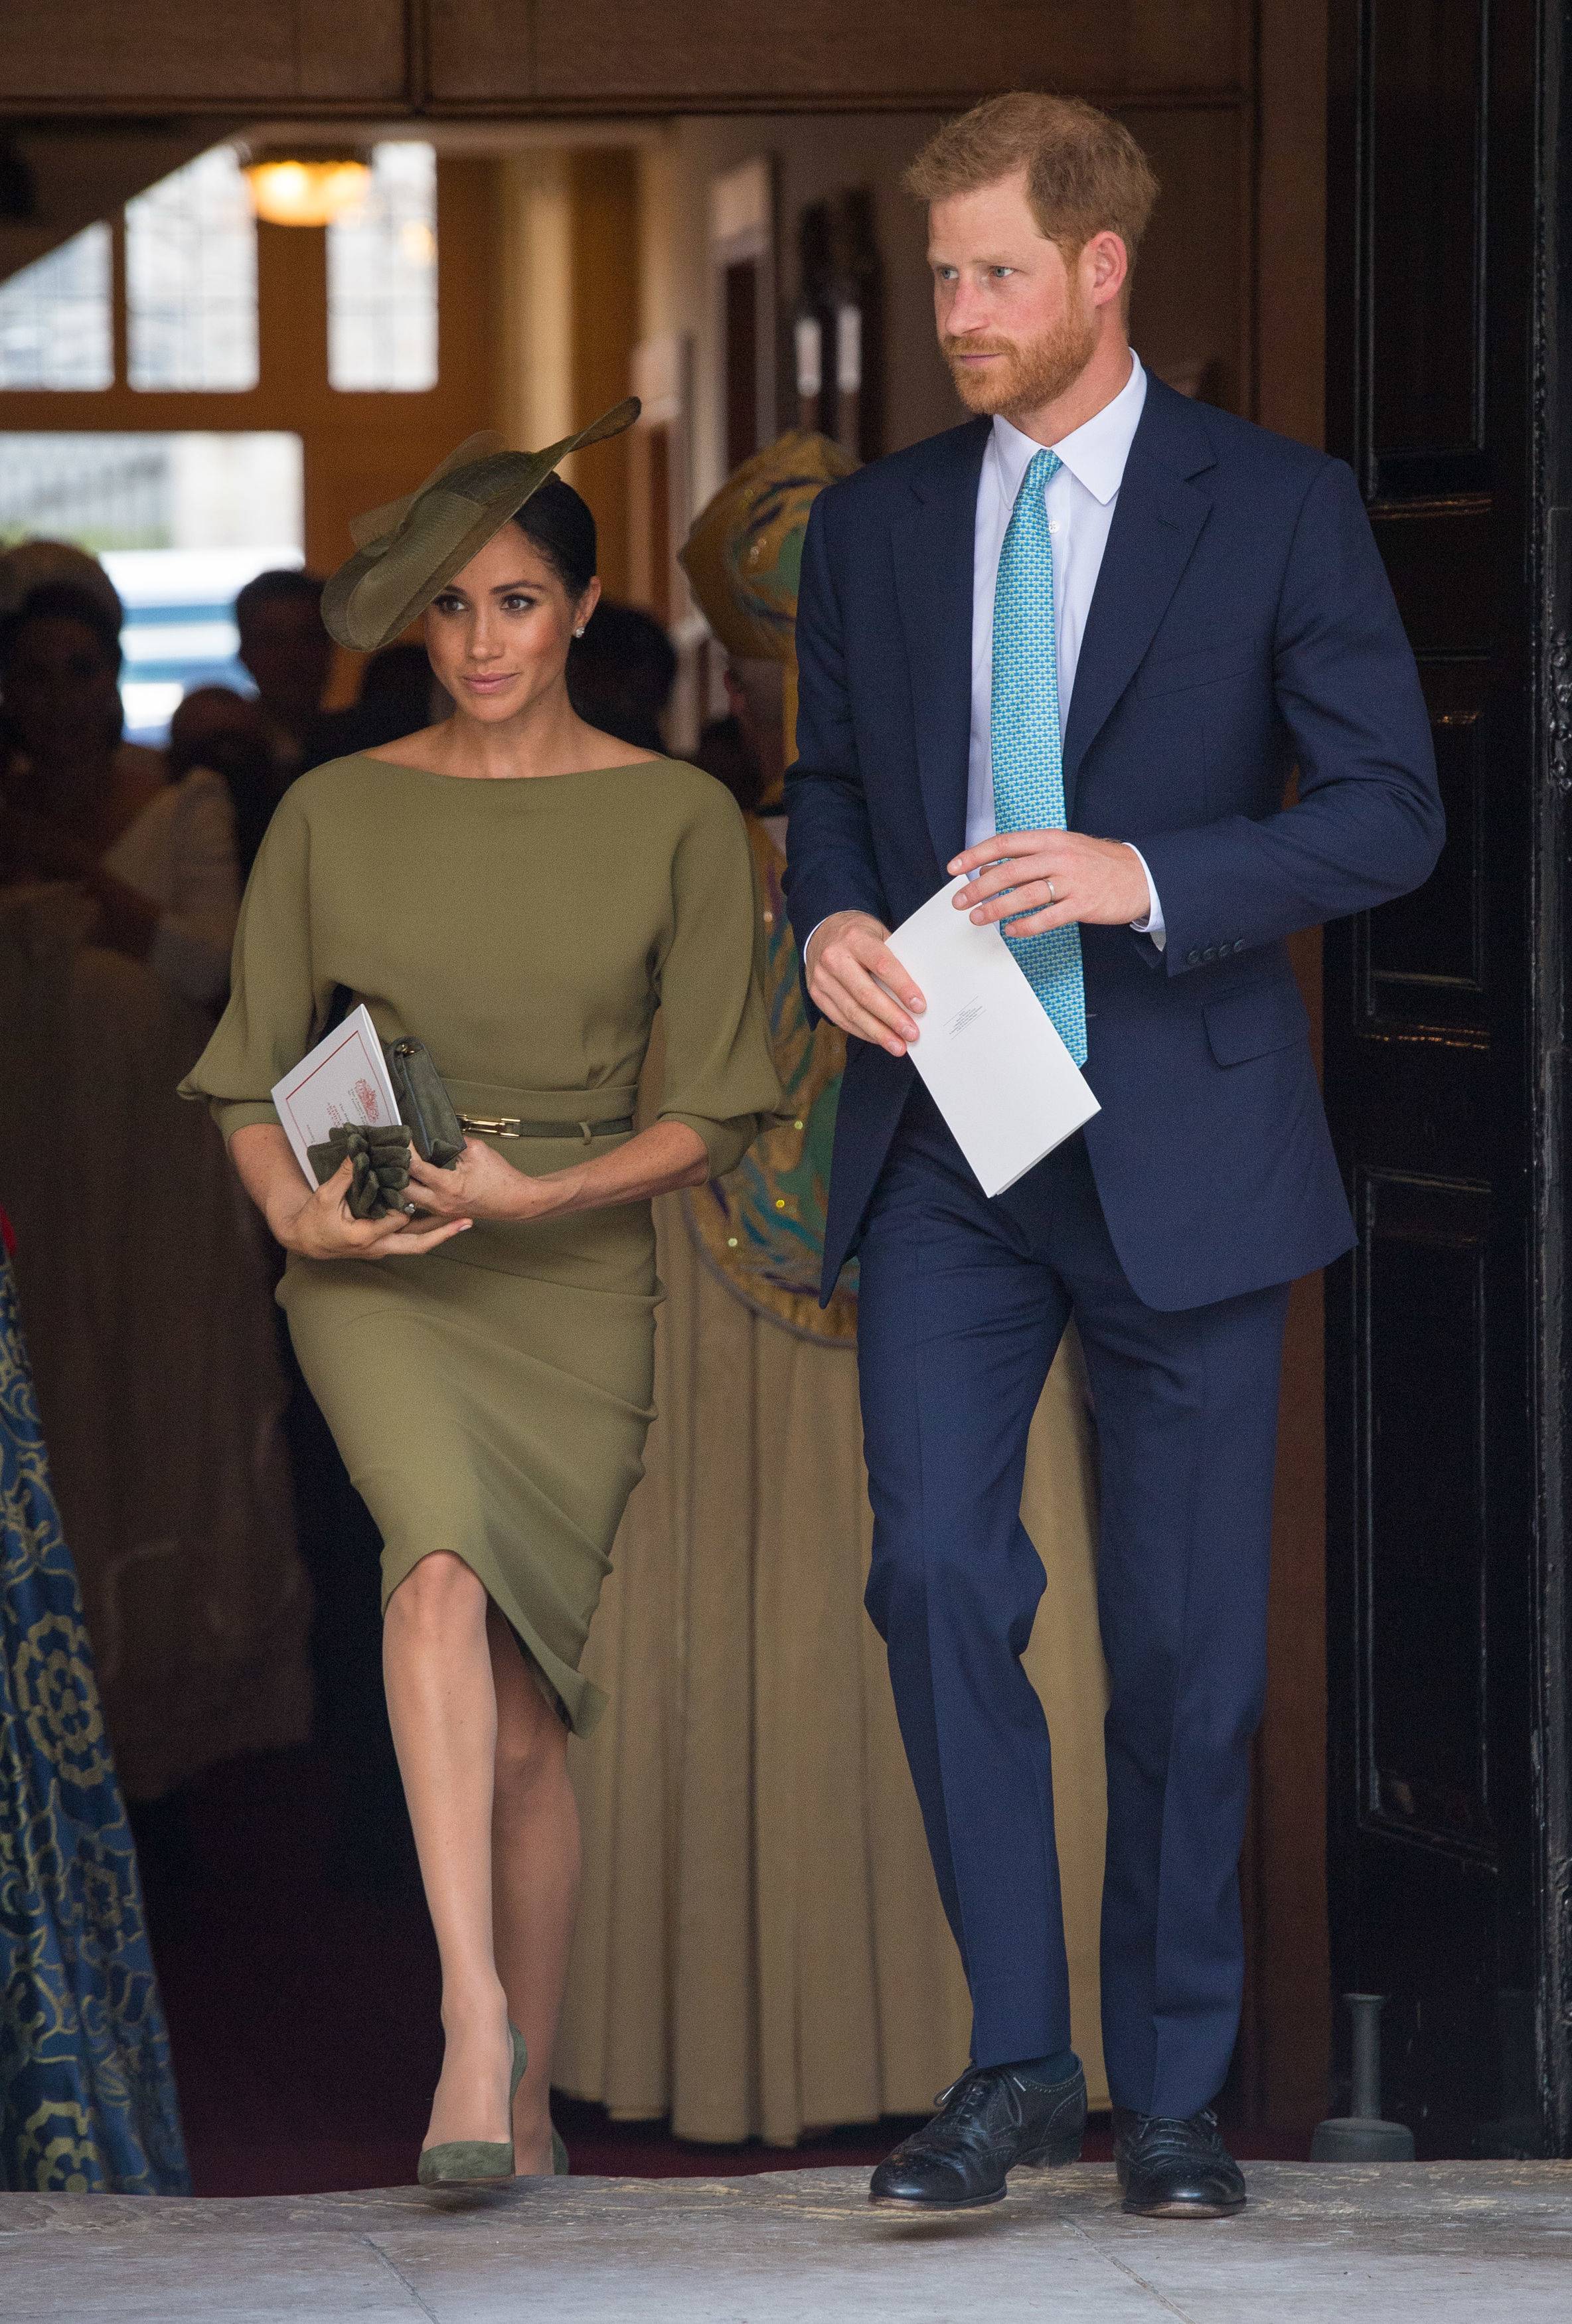 Meghan Markle Stuns in $35 Maternity Dress by H&M